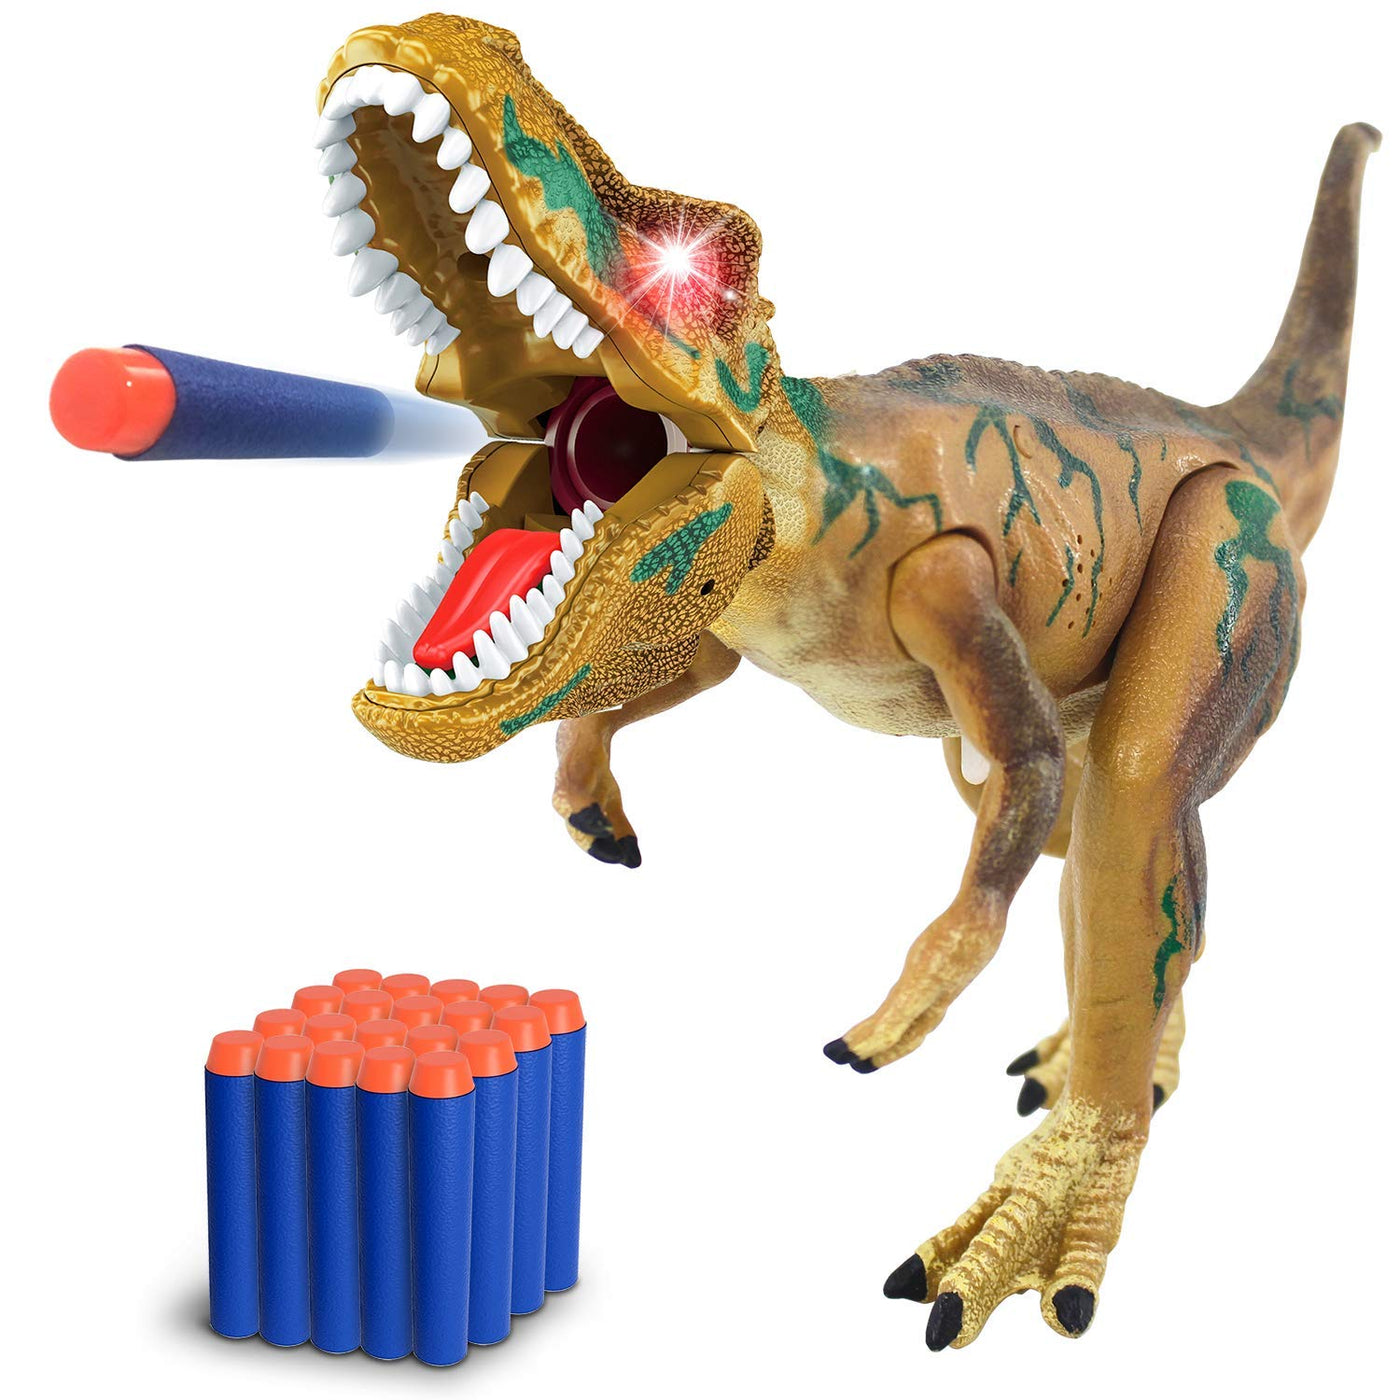 Ejection Dinosaur Gun, Light Up Blaster with 20 Bullets and Roaring Sound